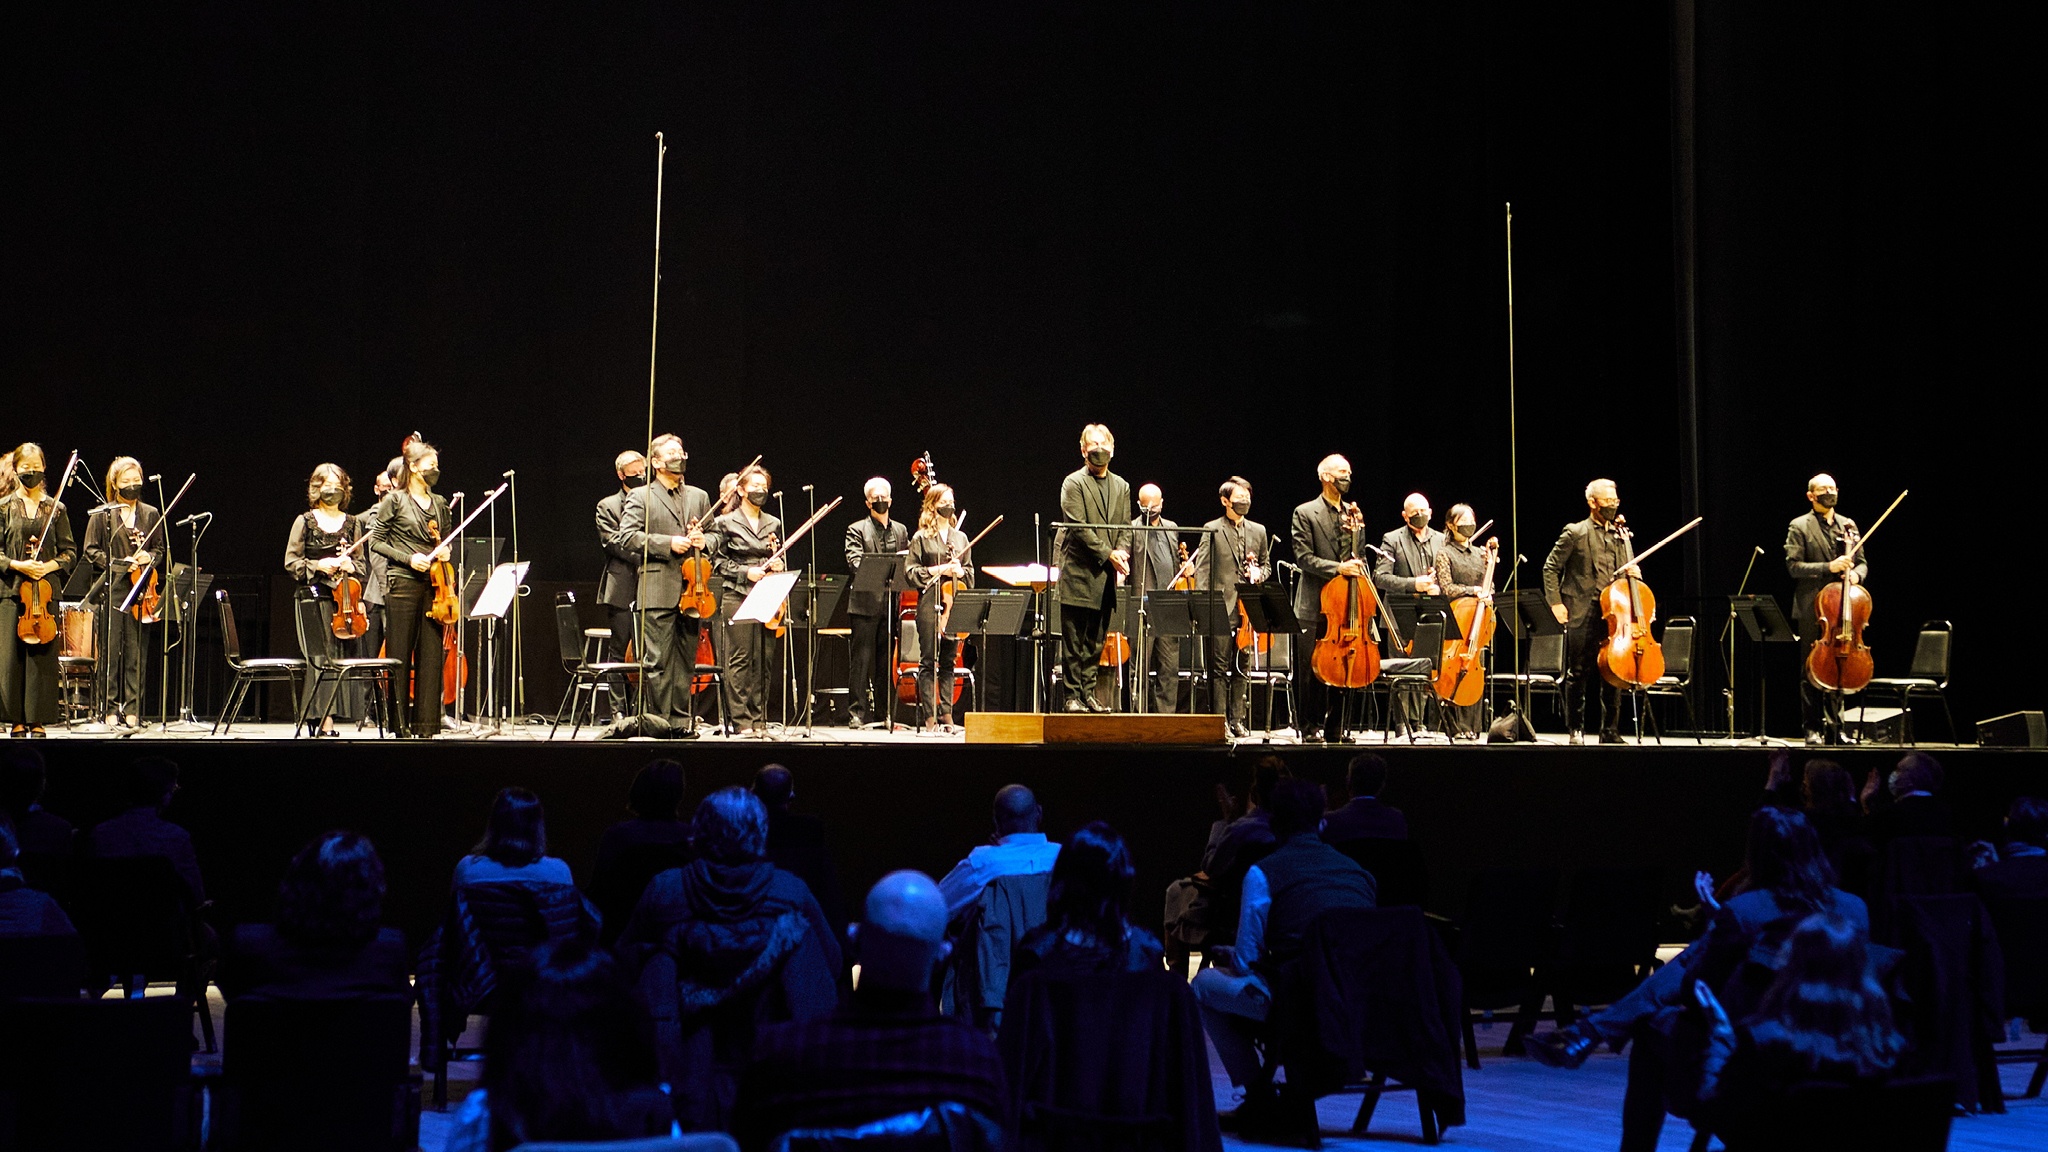 An orchestra standing on a raised stage with people sitting on the floor in the audience in front of them